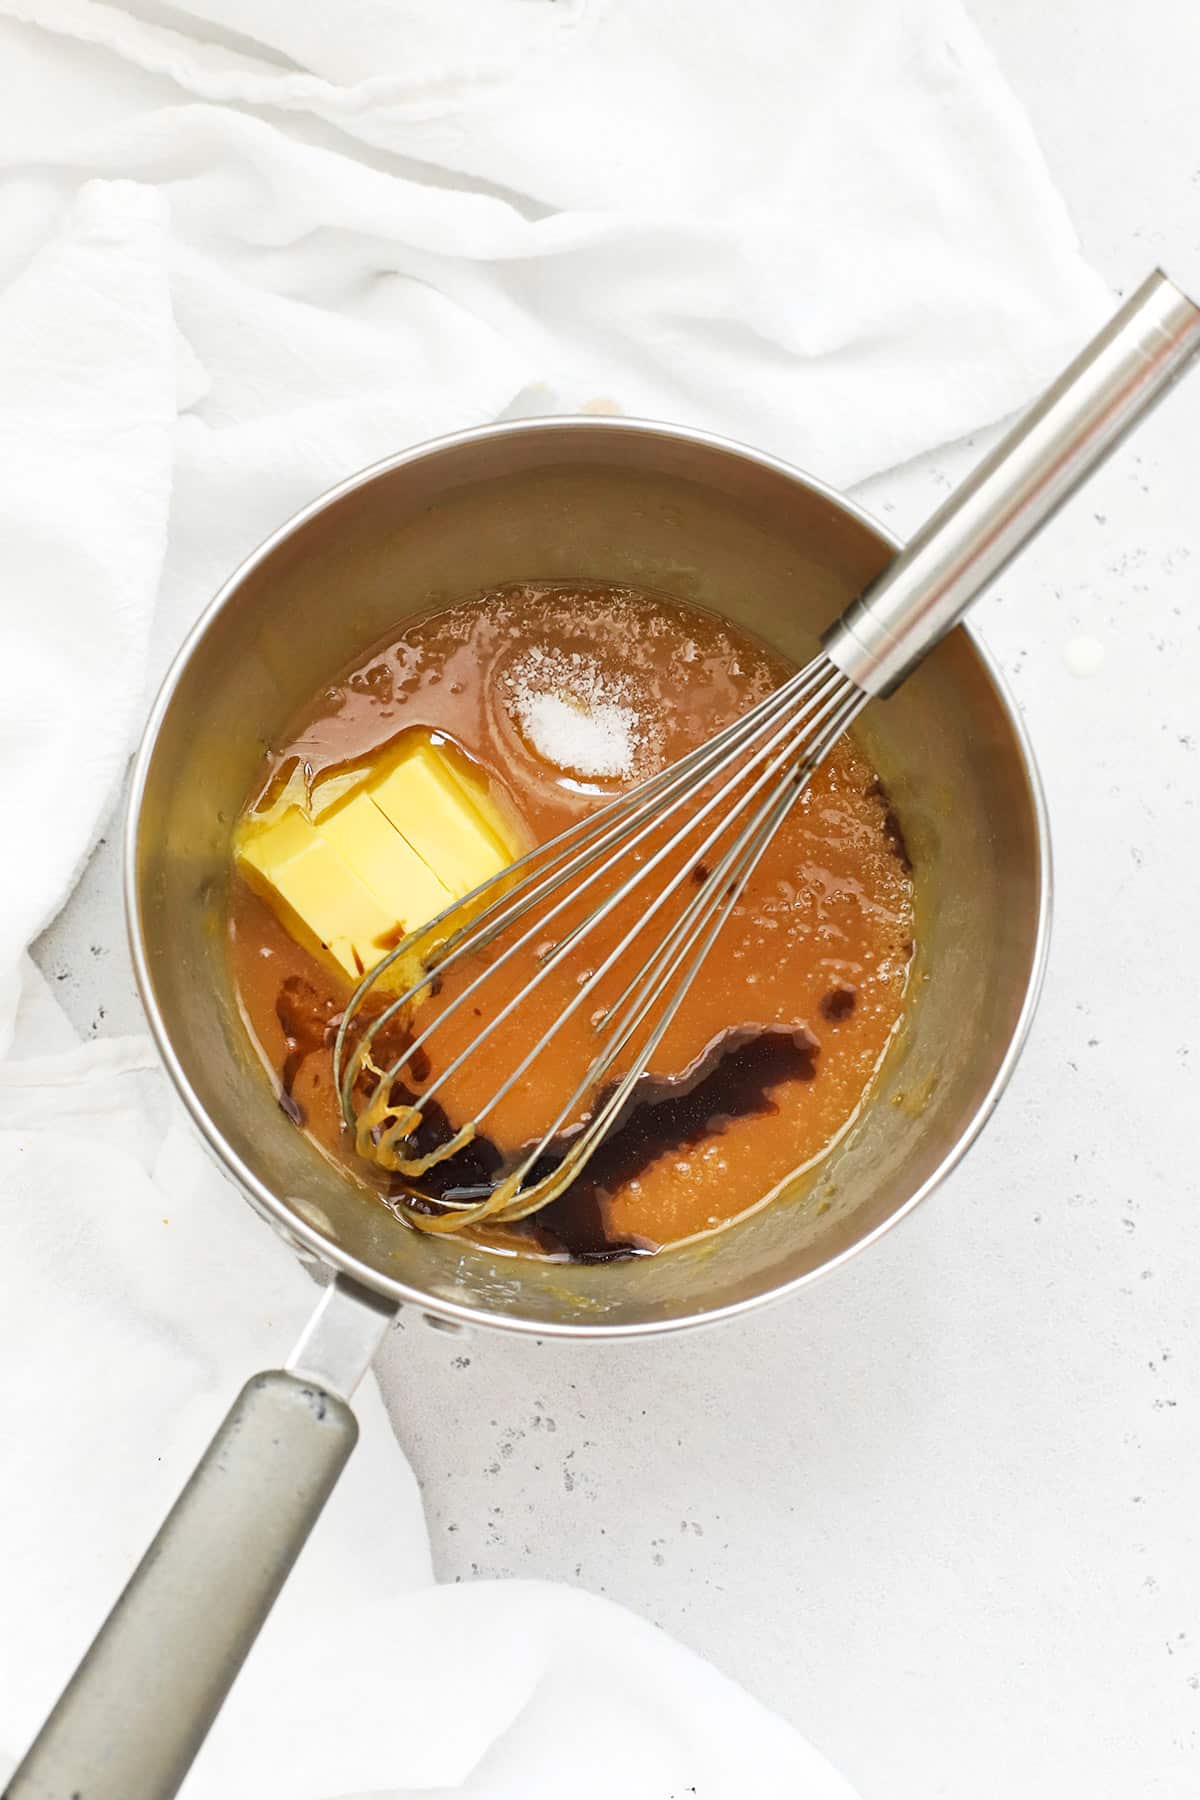 Whisking butter, salt, and vanilla into caramel